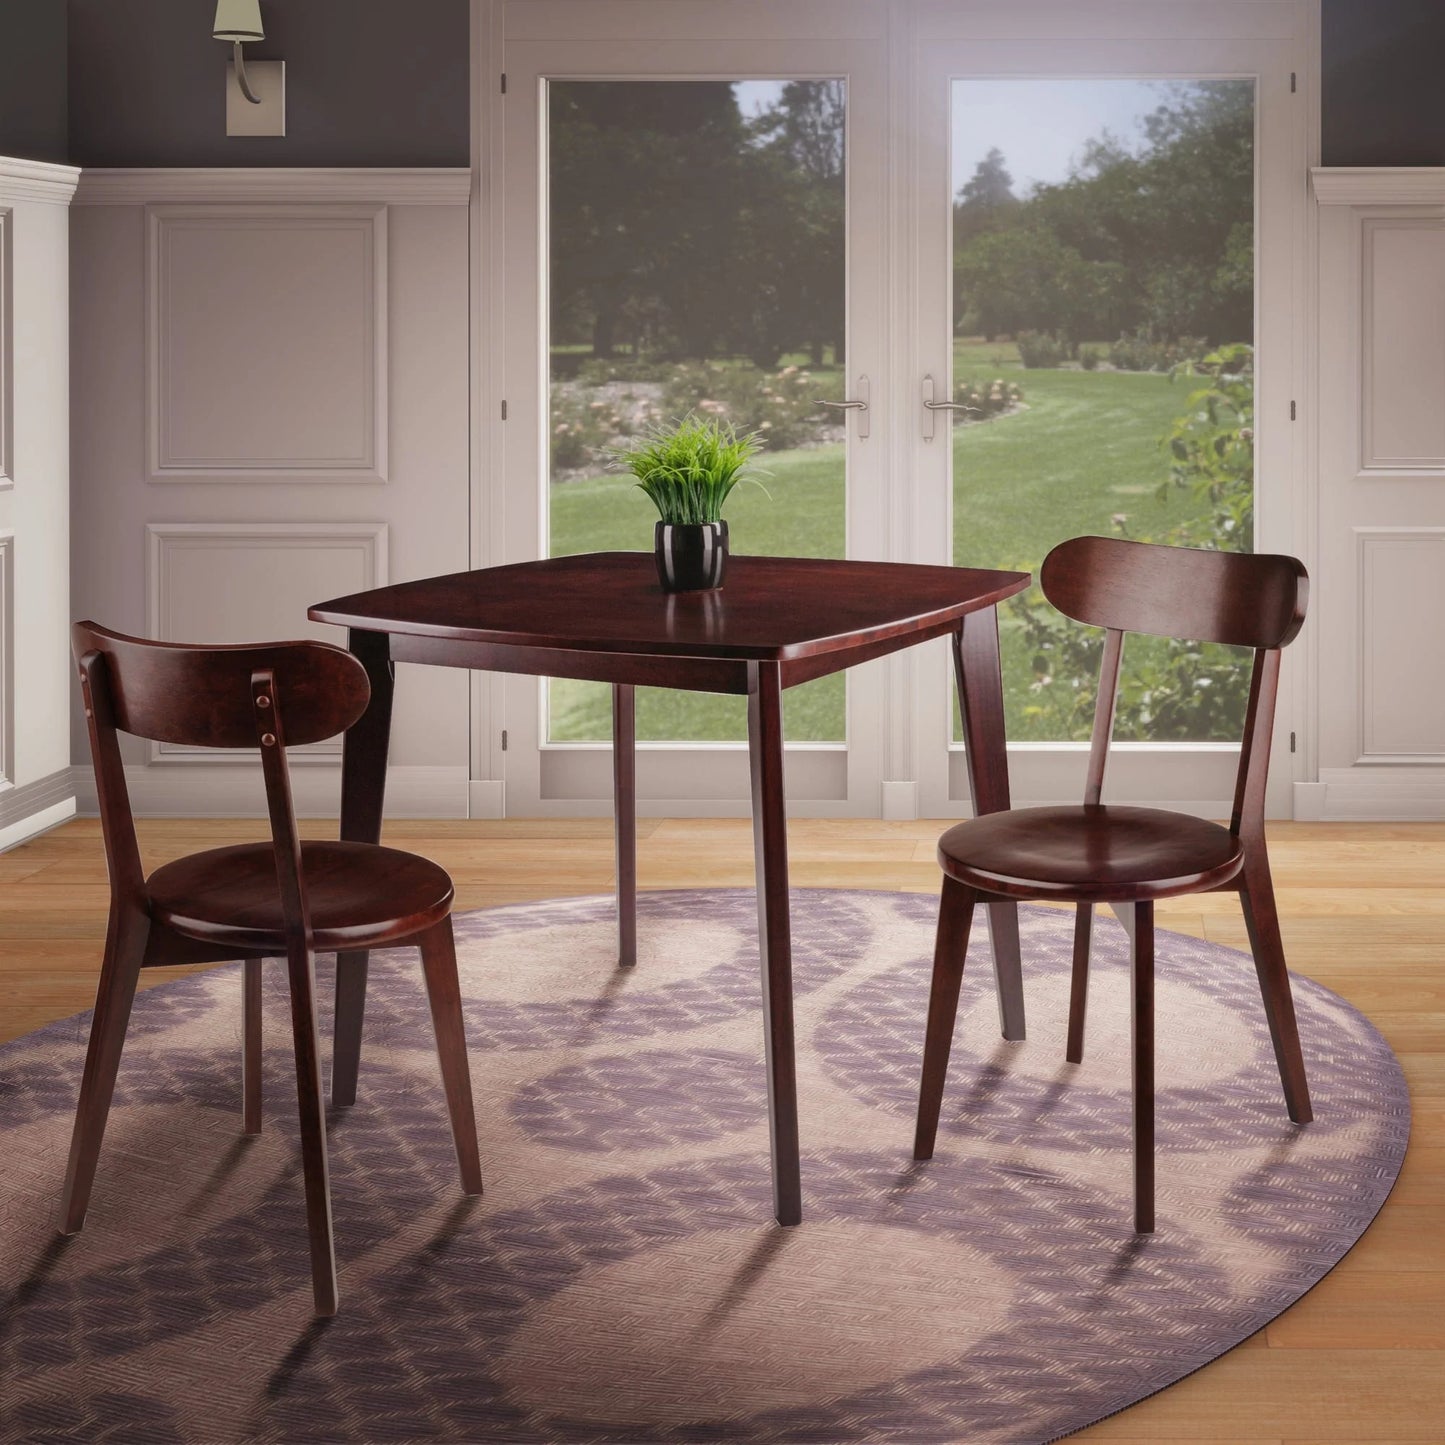 WINSOME Pub Table Set Pauline 3-Pc Dining Table with H-Leg Chairs, Walnut